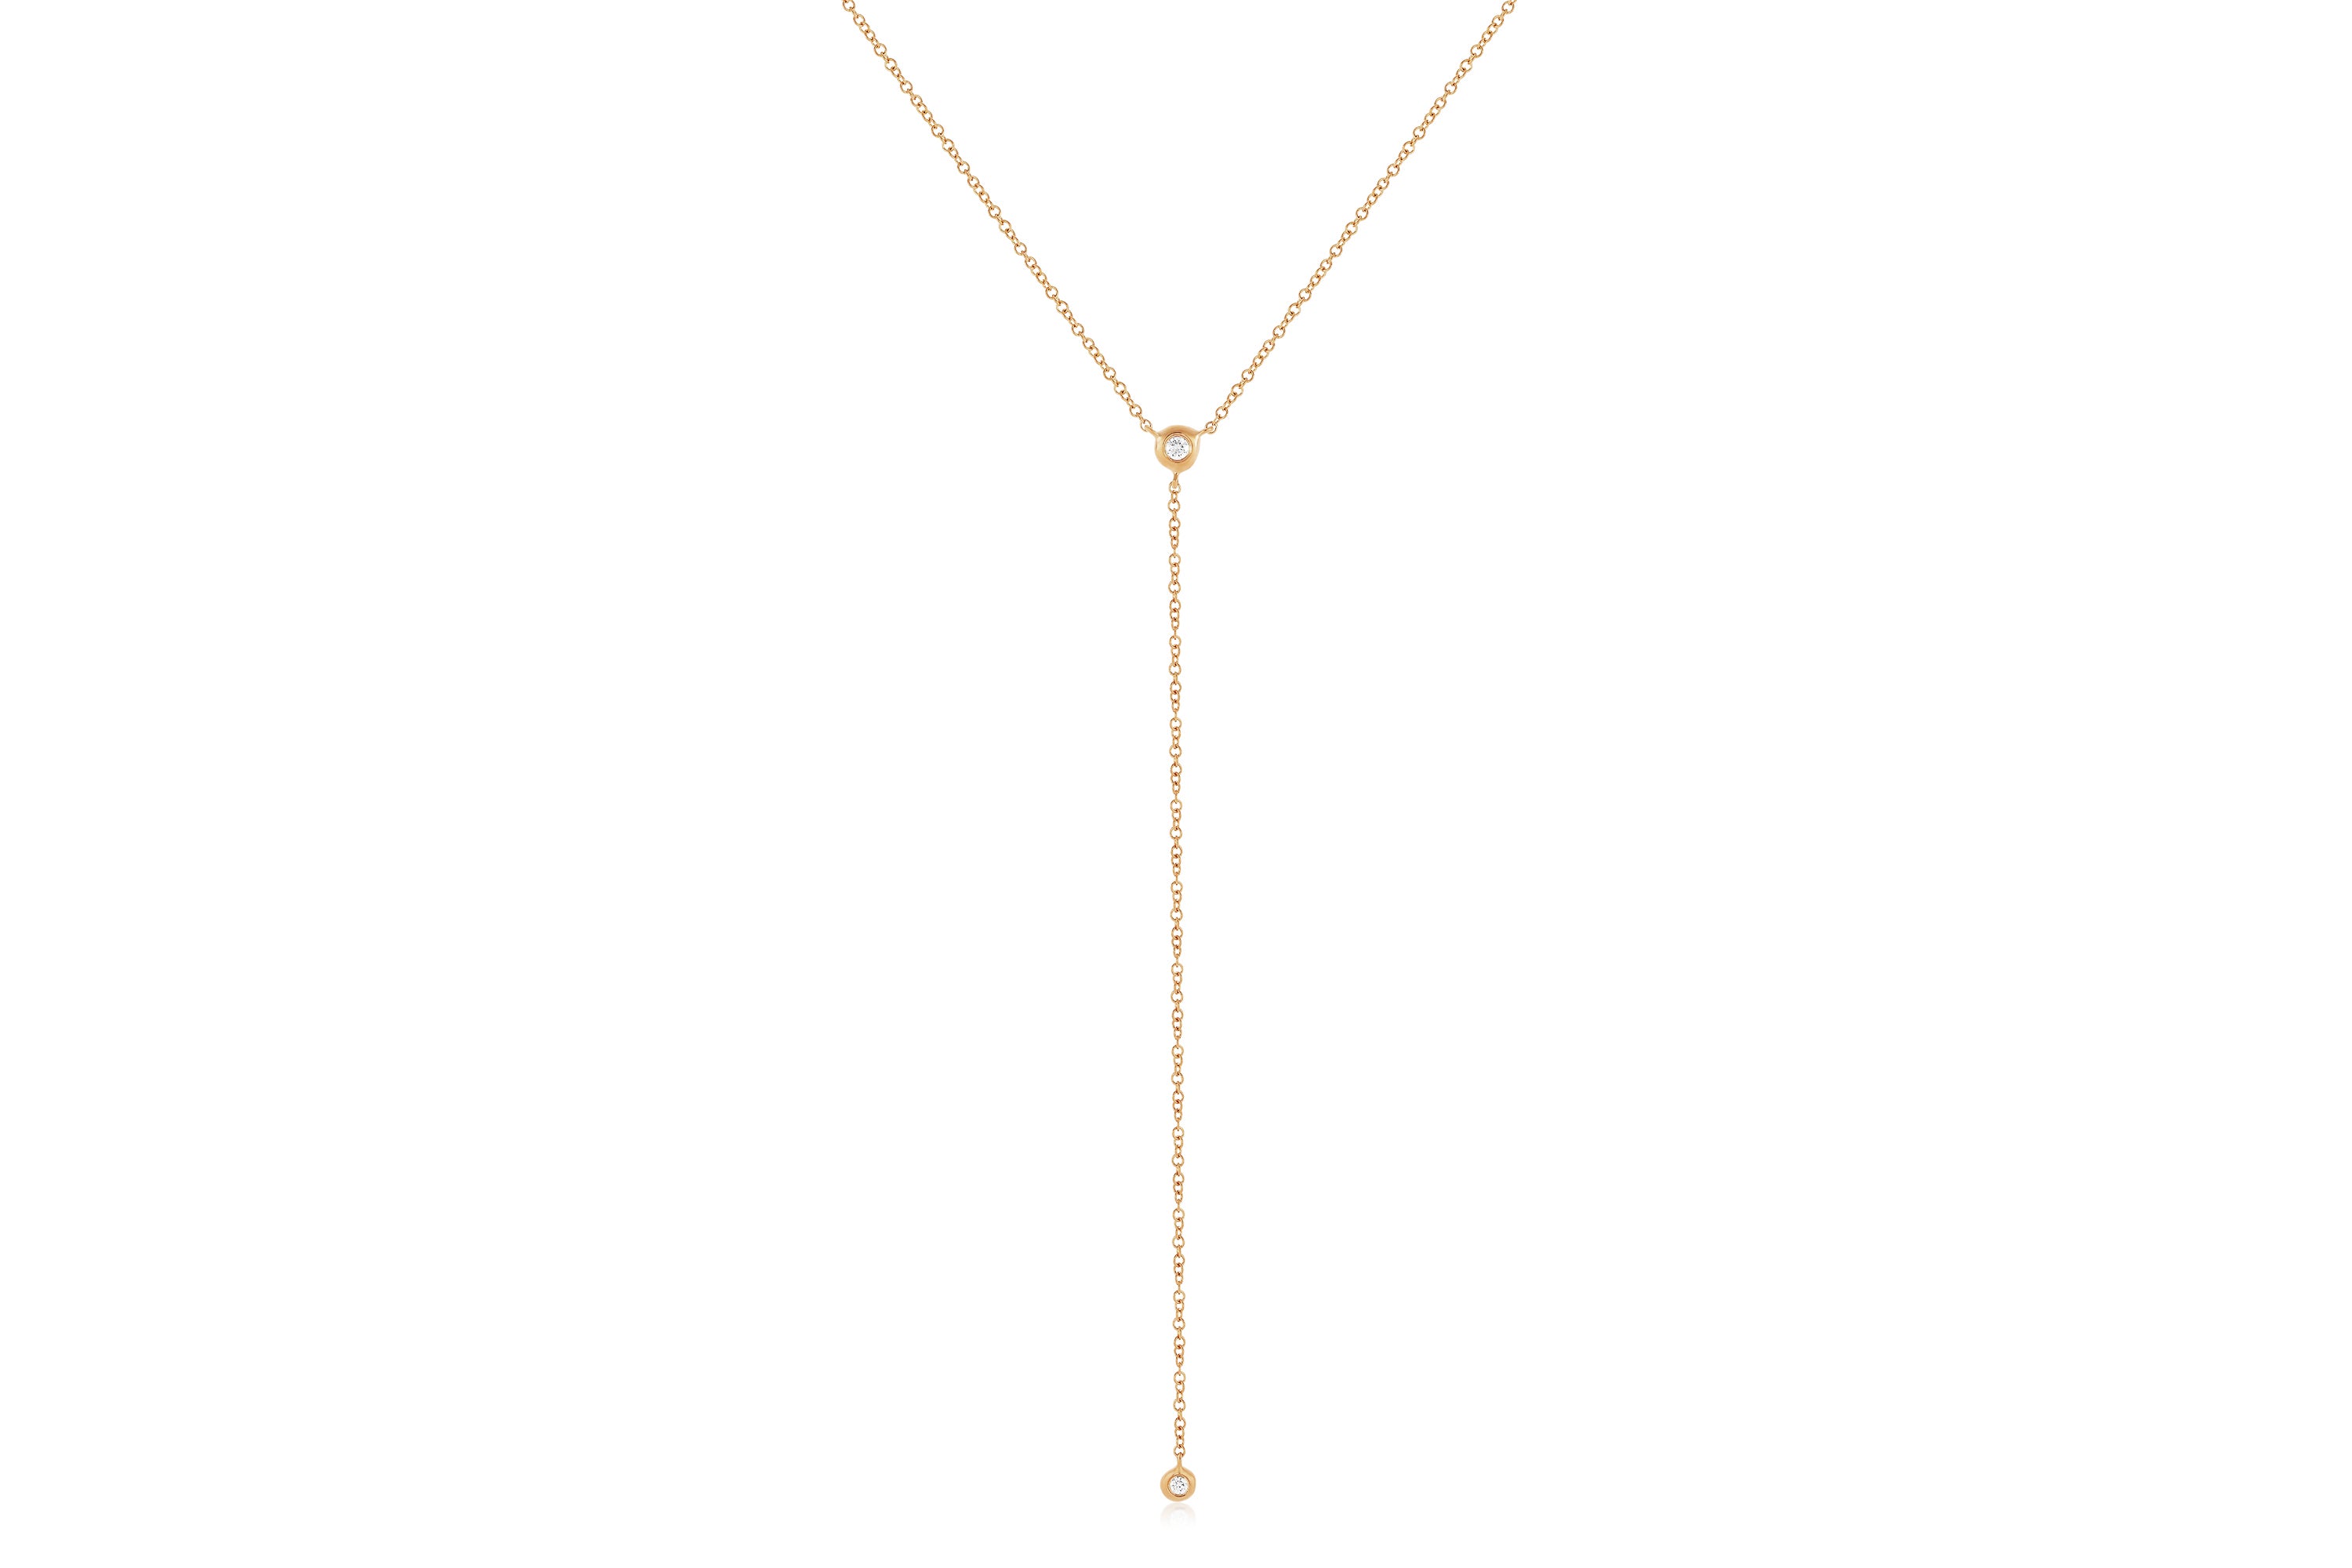 Diamond Pillow Lariat Necklace in 14k rose gold